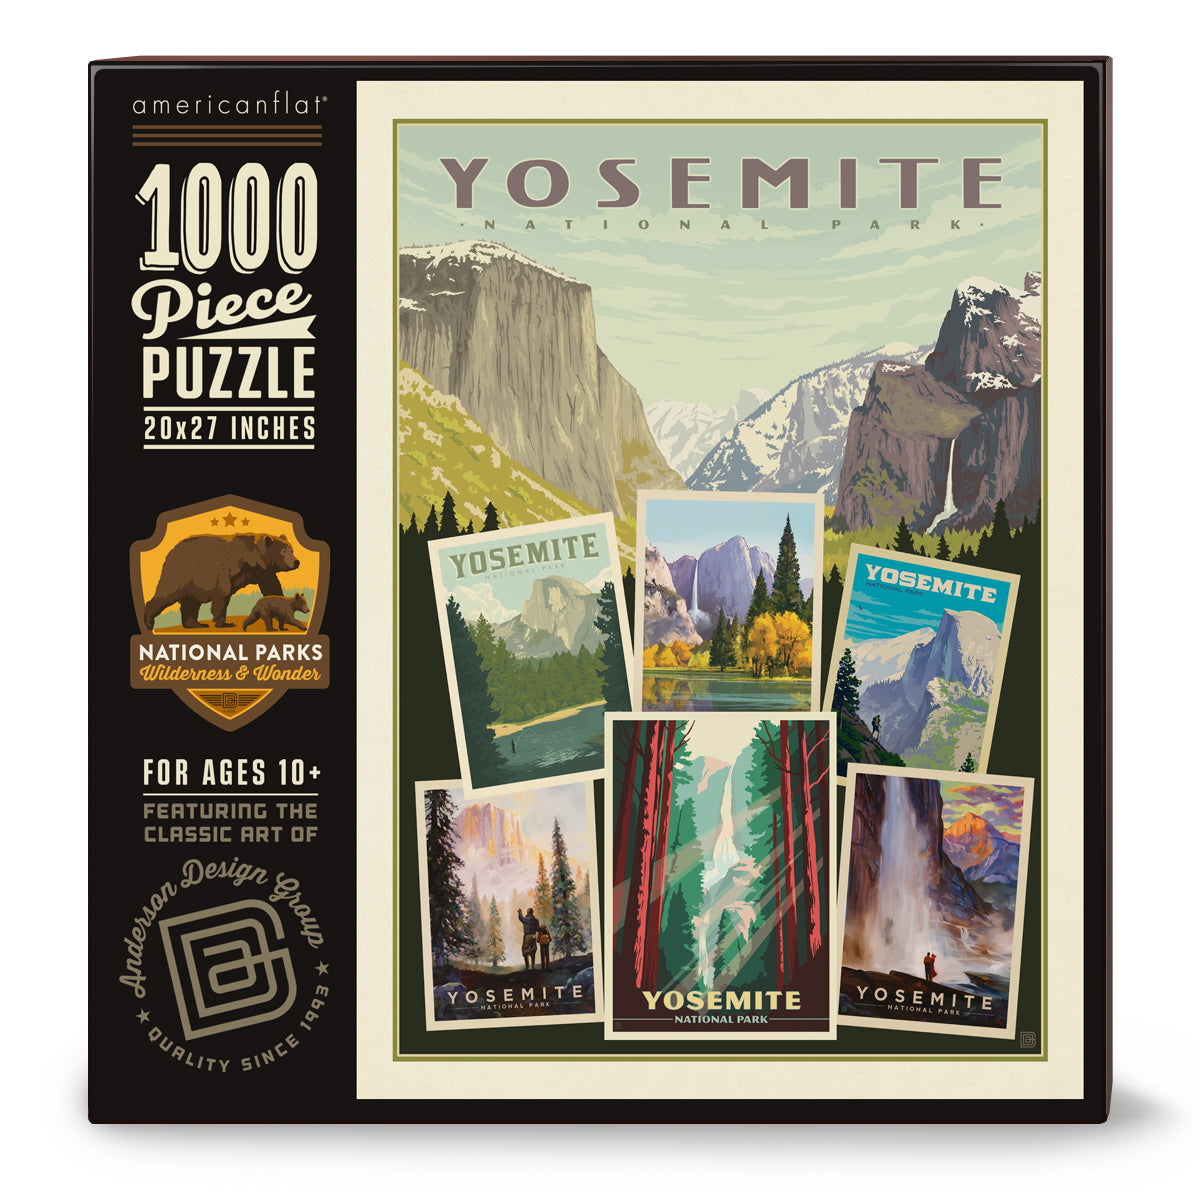 1000-Pc. Puzzle: National Parks: Yosemite Collage (Best Seller!)